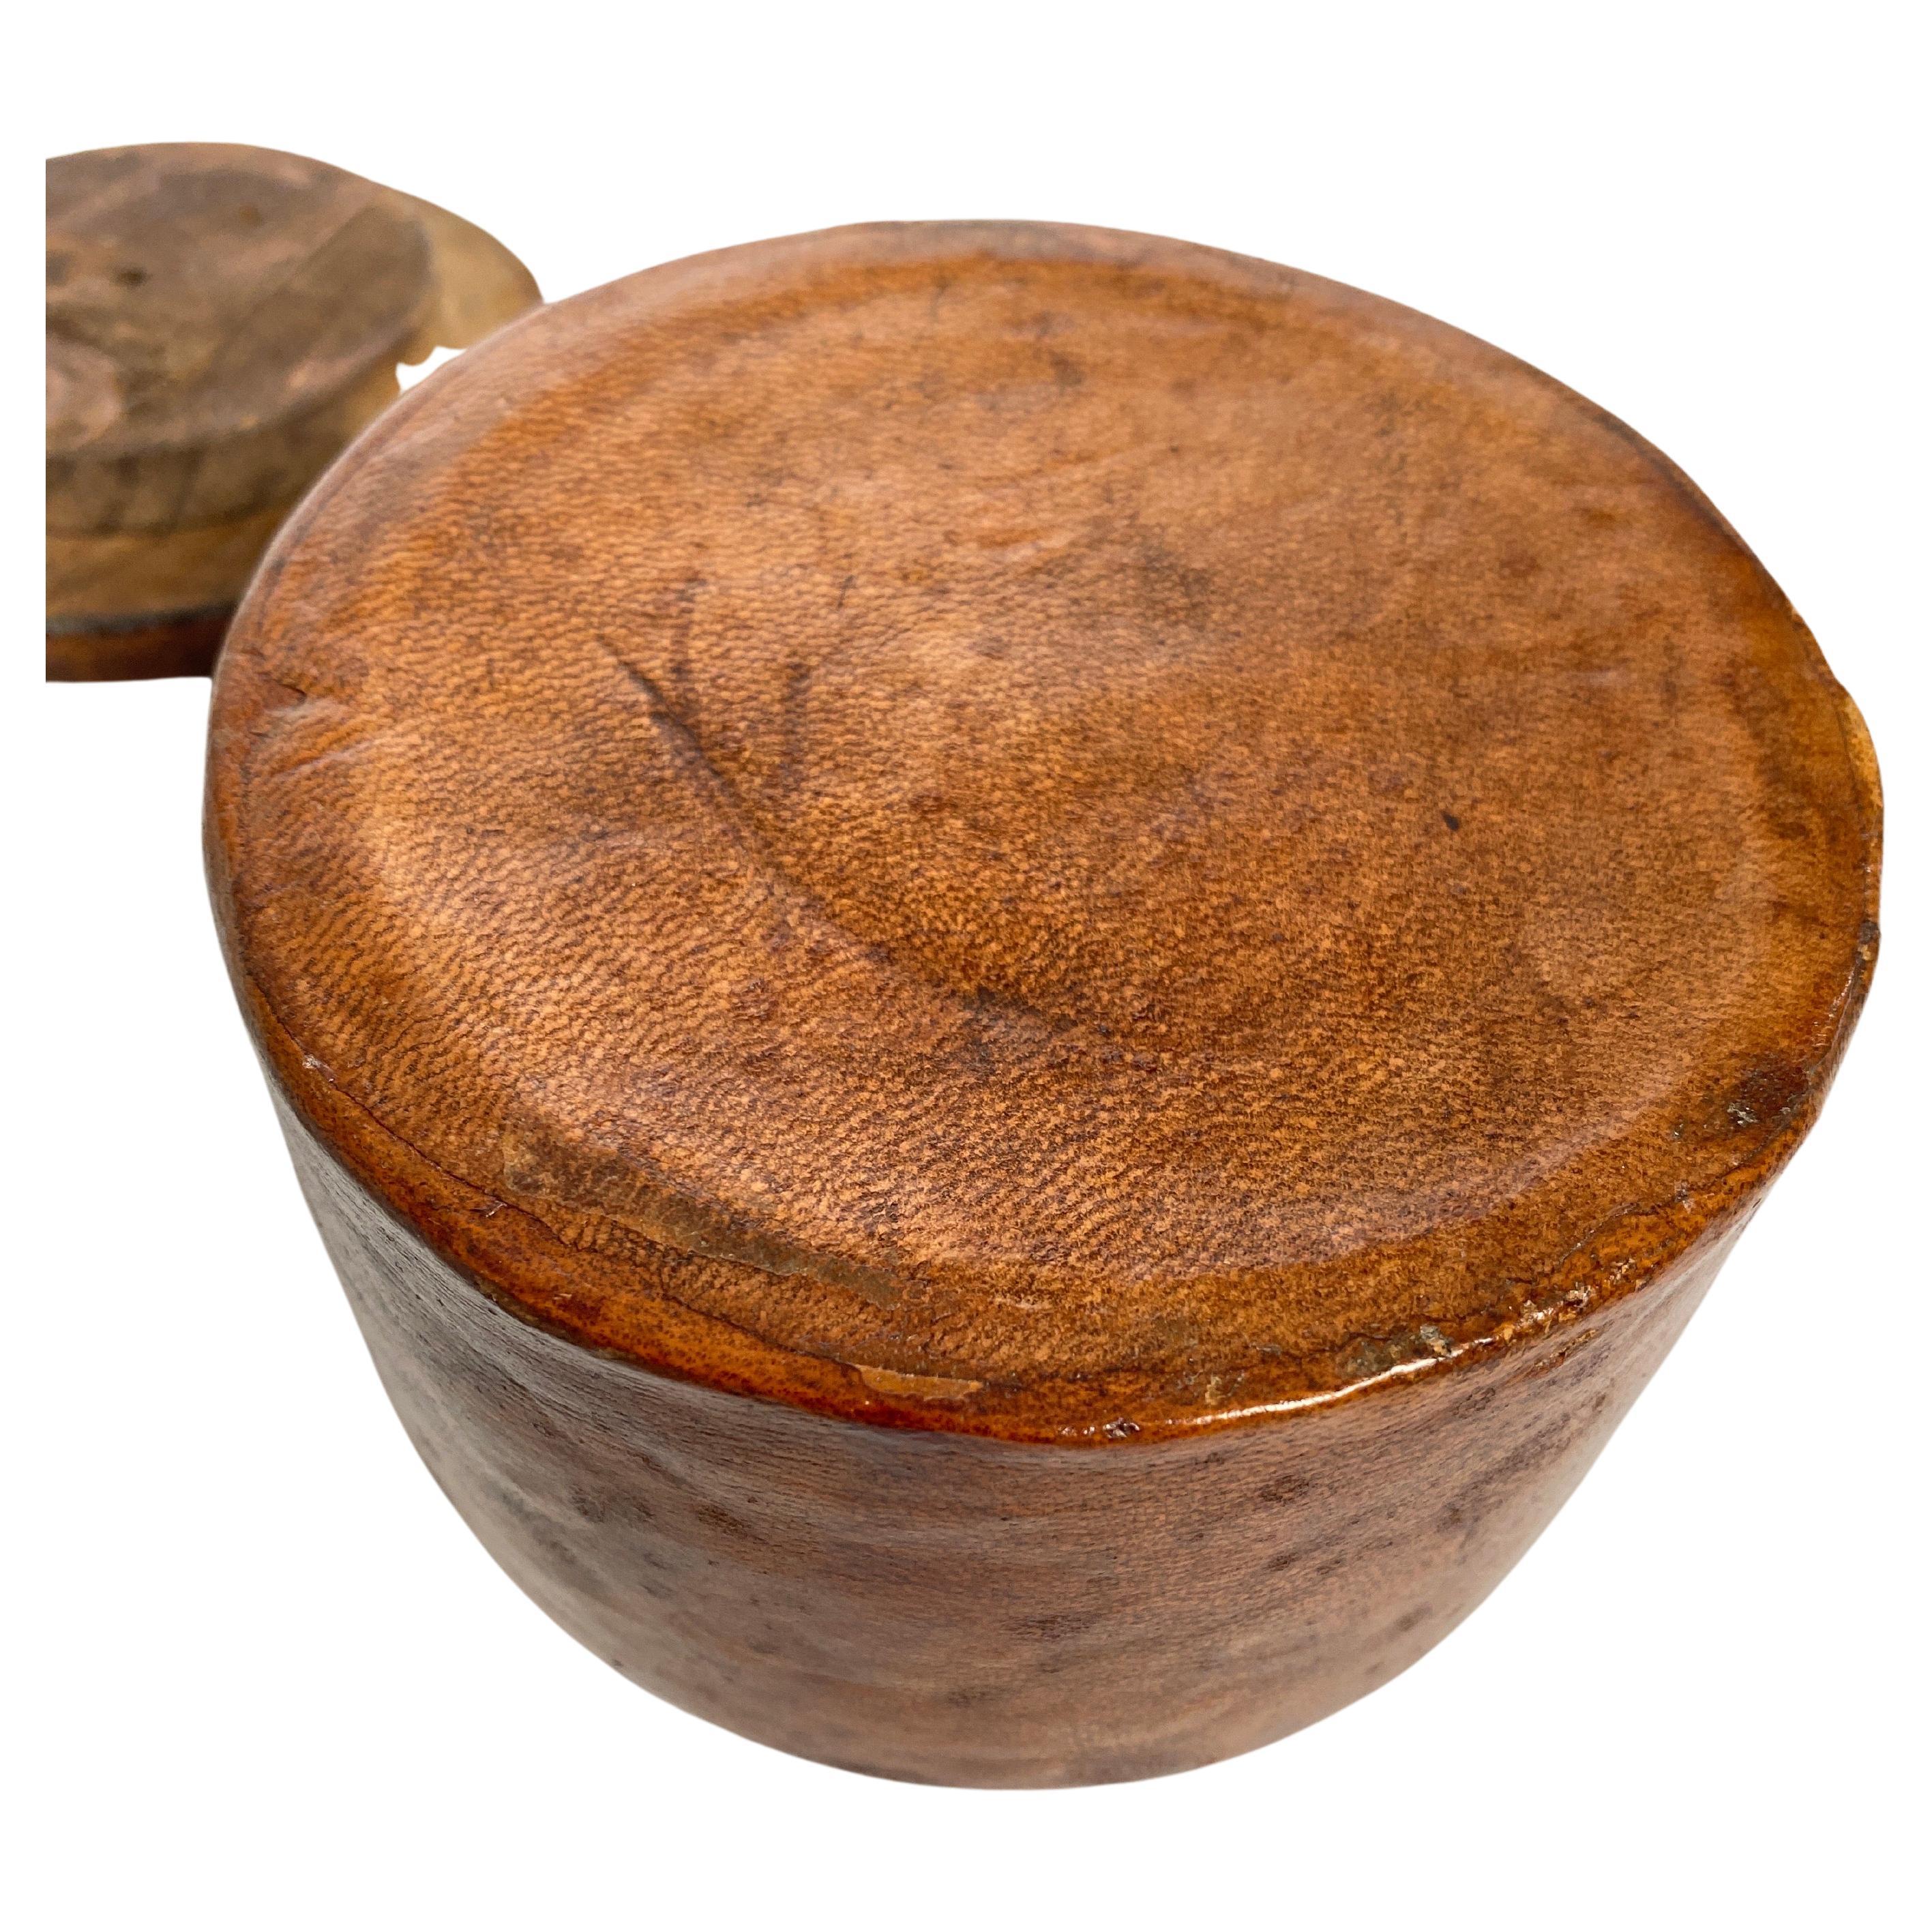 This snuffbox, or tobacco box, covered with leather, brown in color. The underside of the lid is made of wood, and the inside of the pot is ceramic. The object has been signed by the artist. It was made in France in the 1940s, it was during the